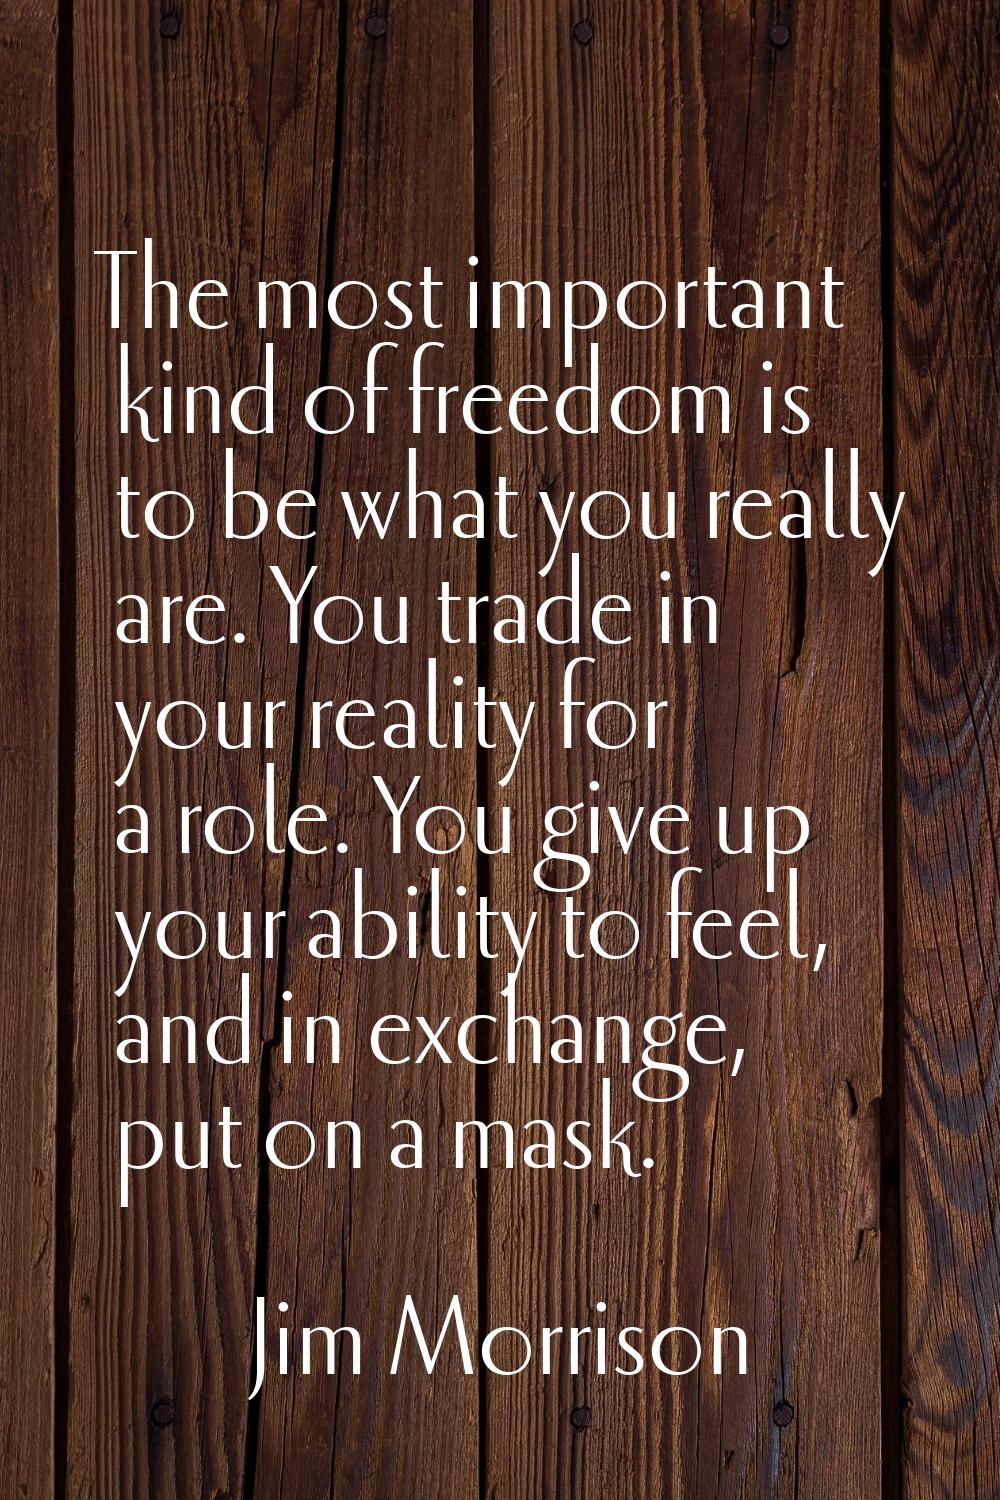 The most important kind of freedom is to be what you really are. You trade in your reality for a ro